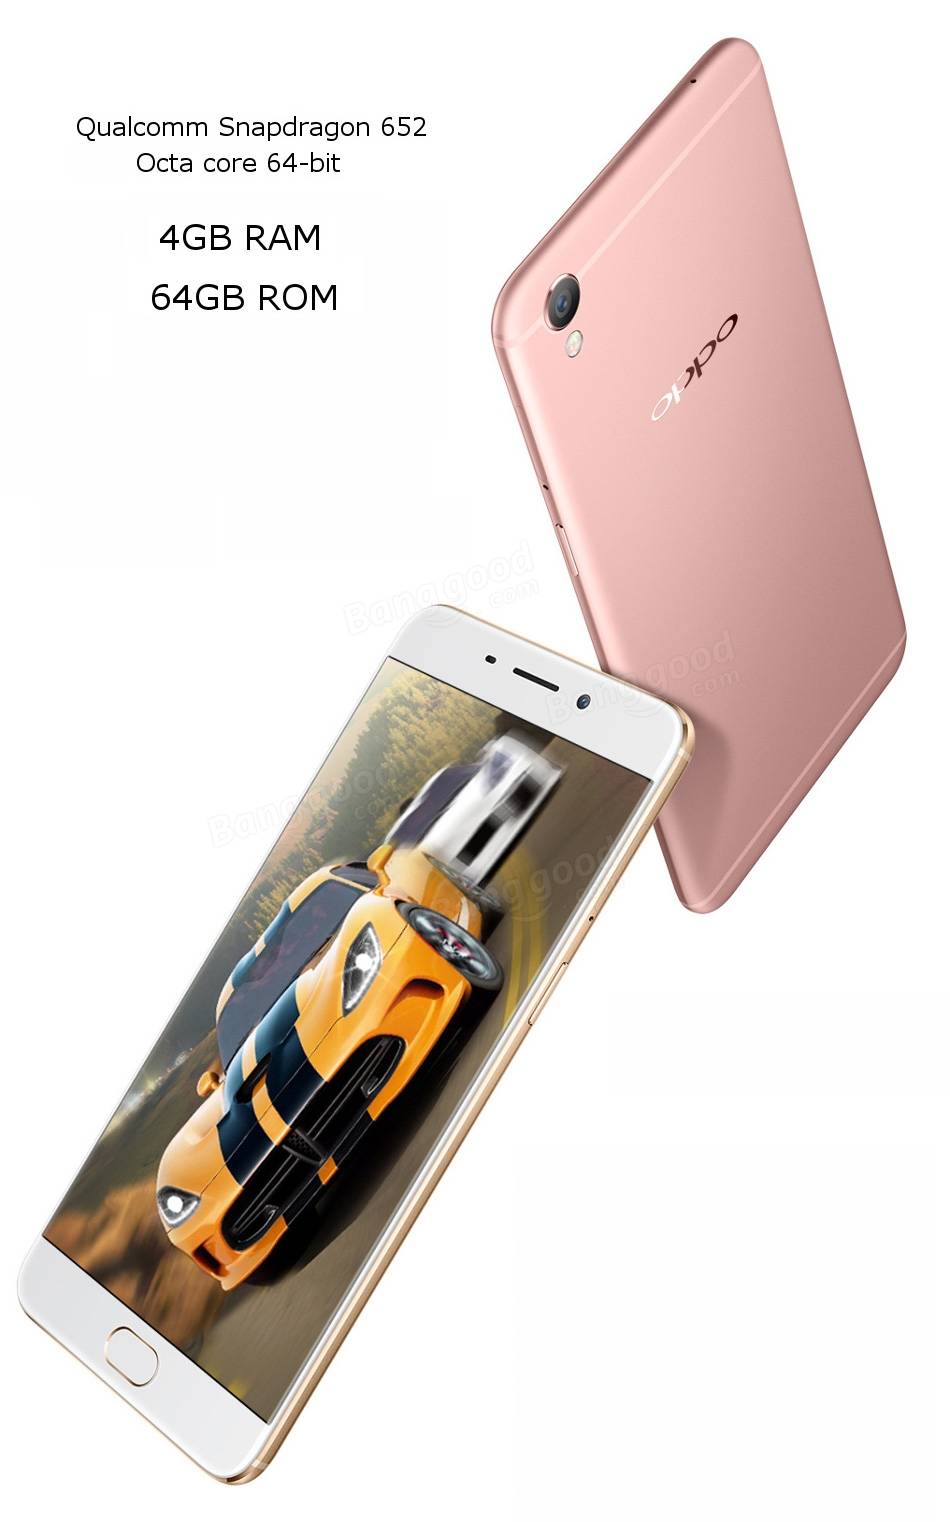 oppo r9 plus - Thai News Collections